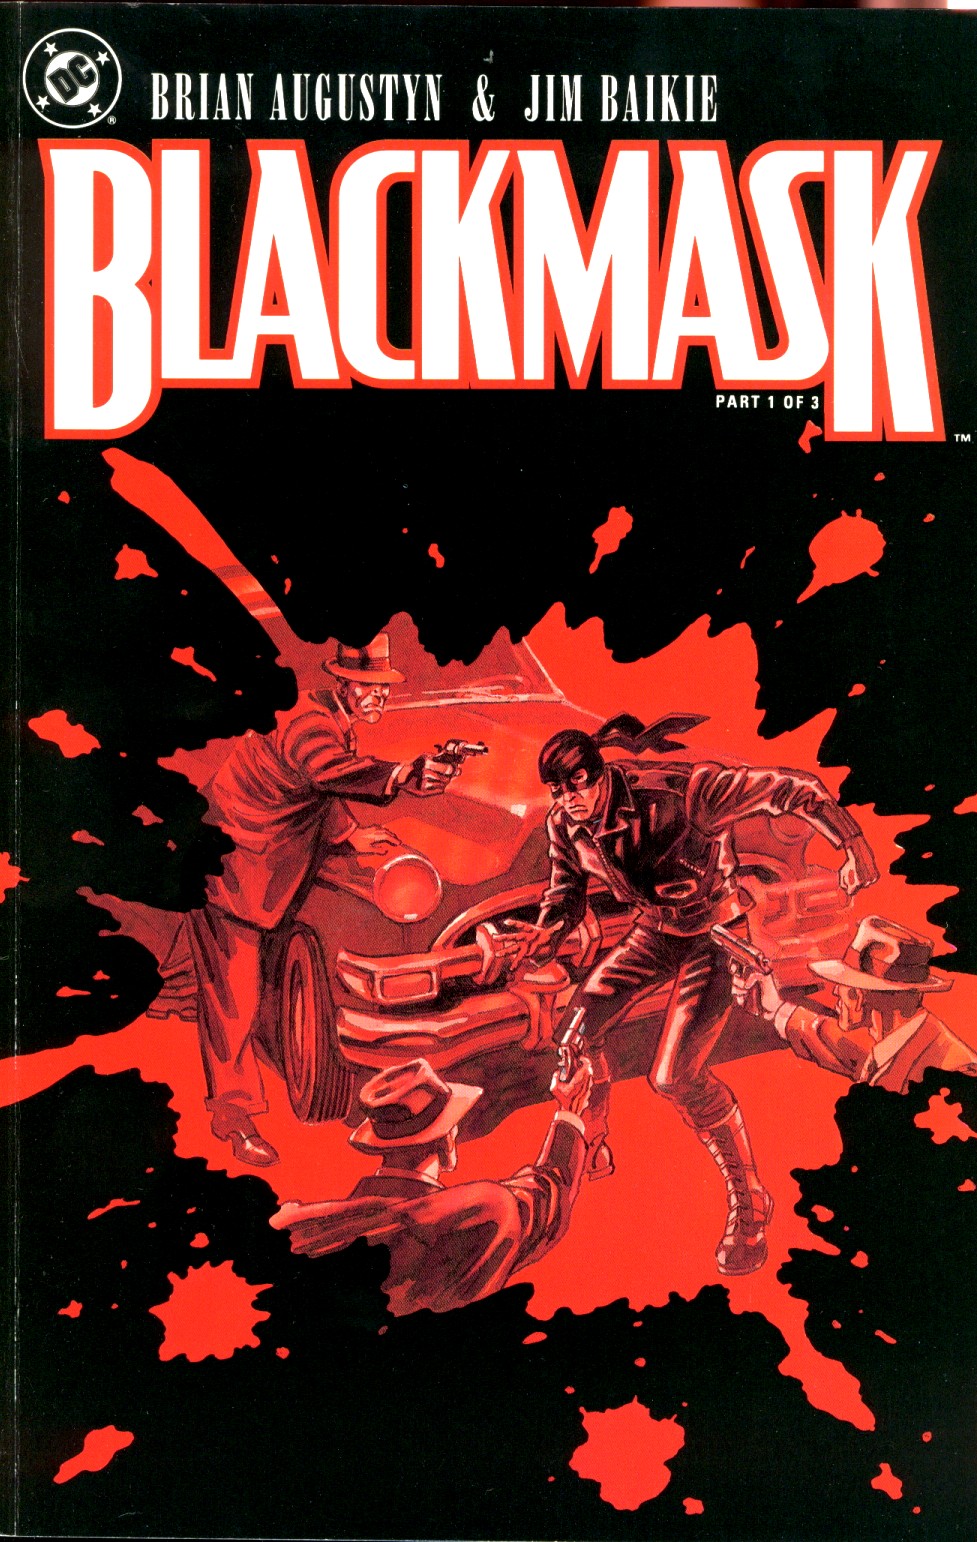 Read online Blackmask comic -  Issue #1 - 1